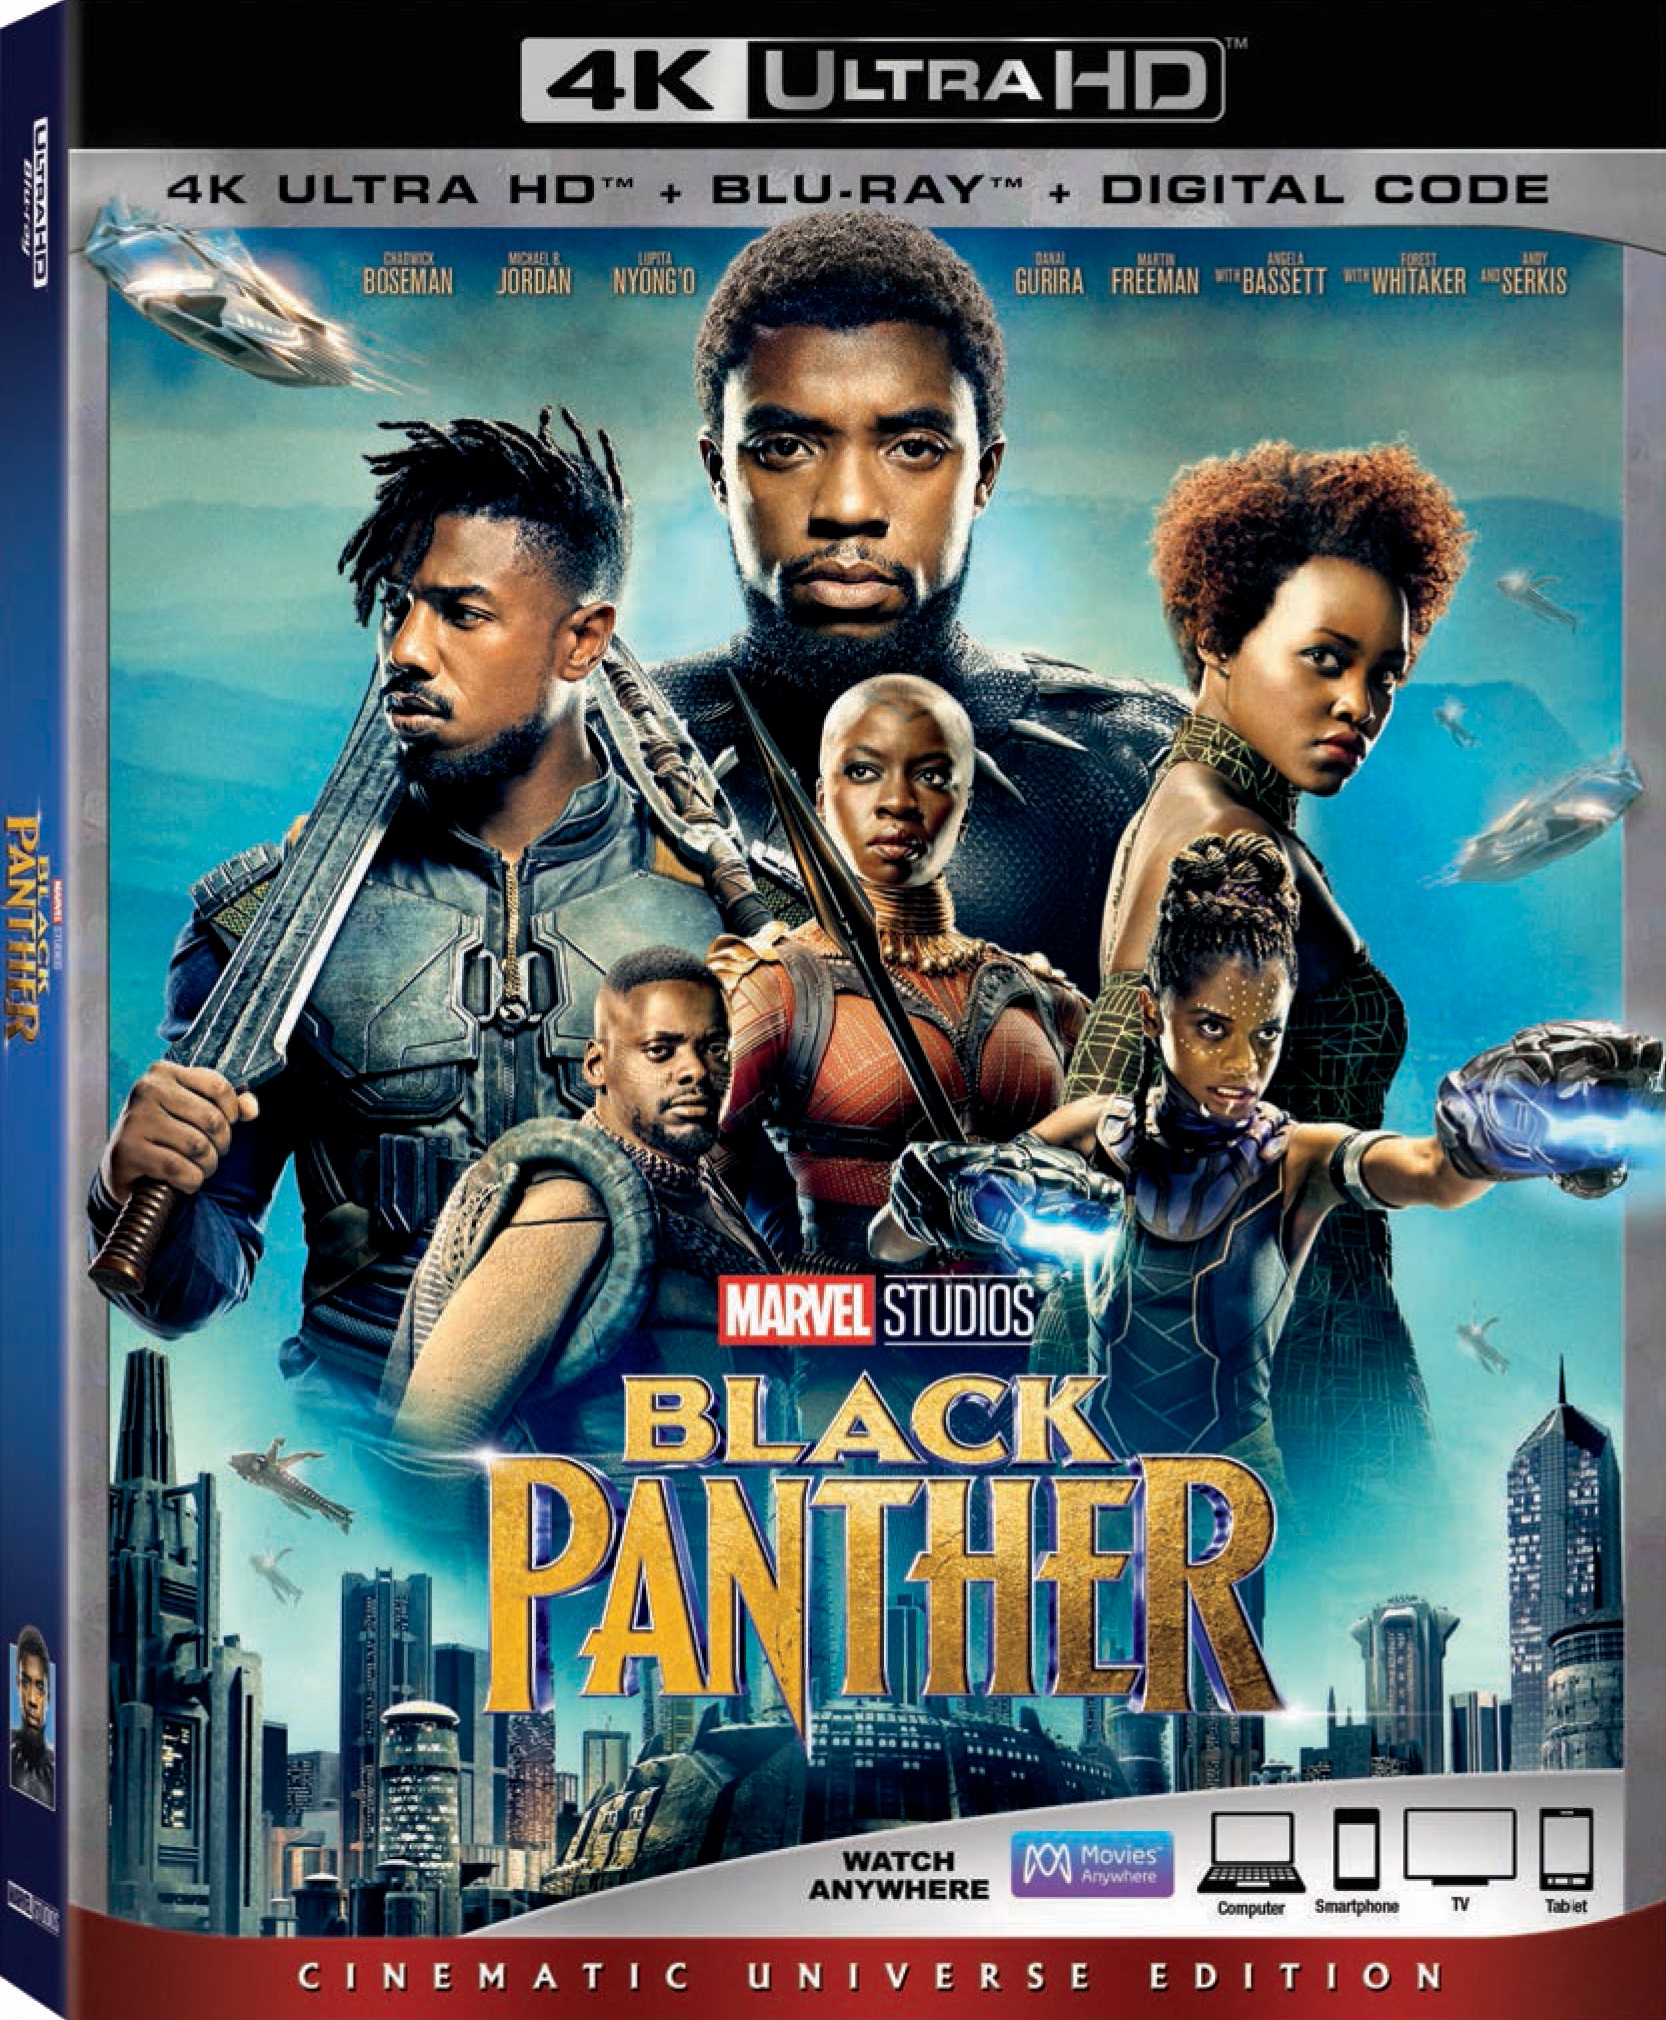 Marvel's 'Black Panther'; Arrives On Digital May 8 & On 4K Ultra HD, Blu-ray & DVD May 15, 2018 From Marvel Studios 2